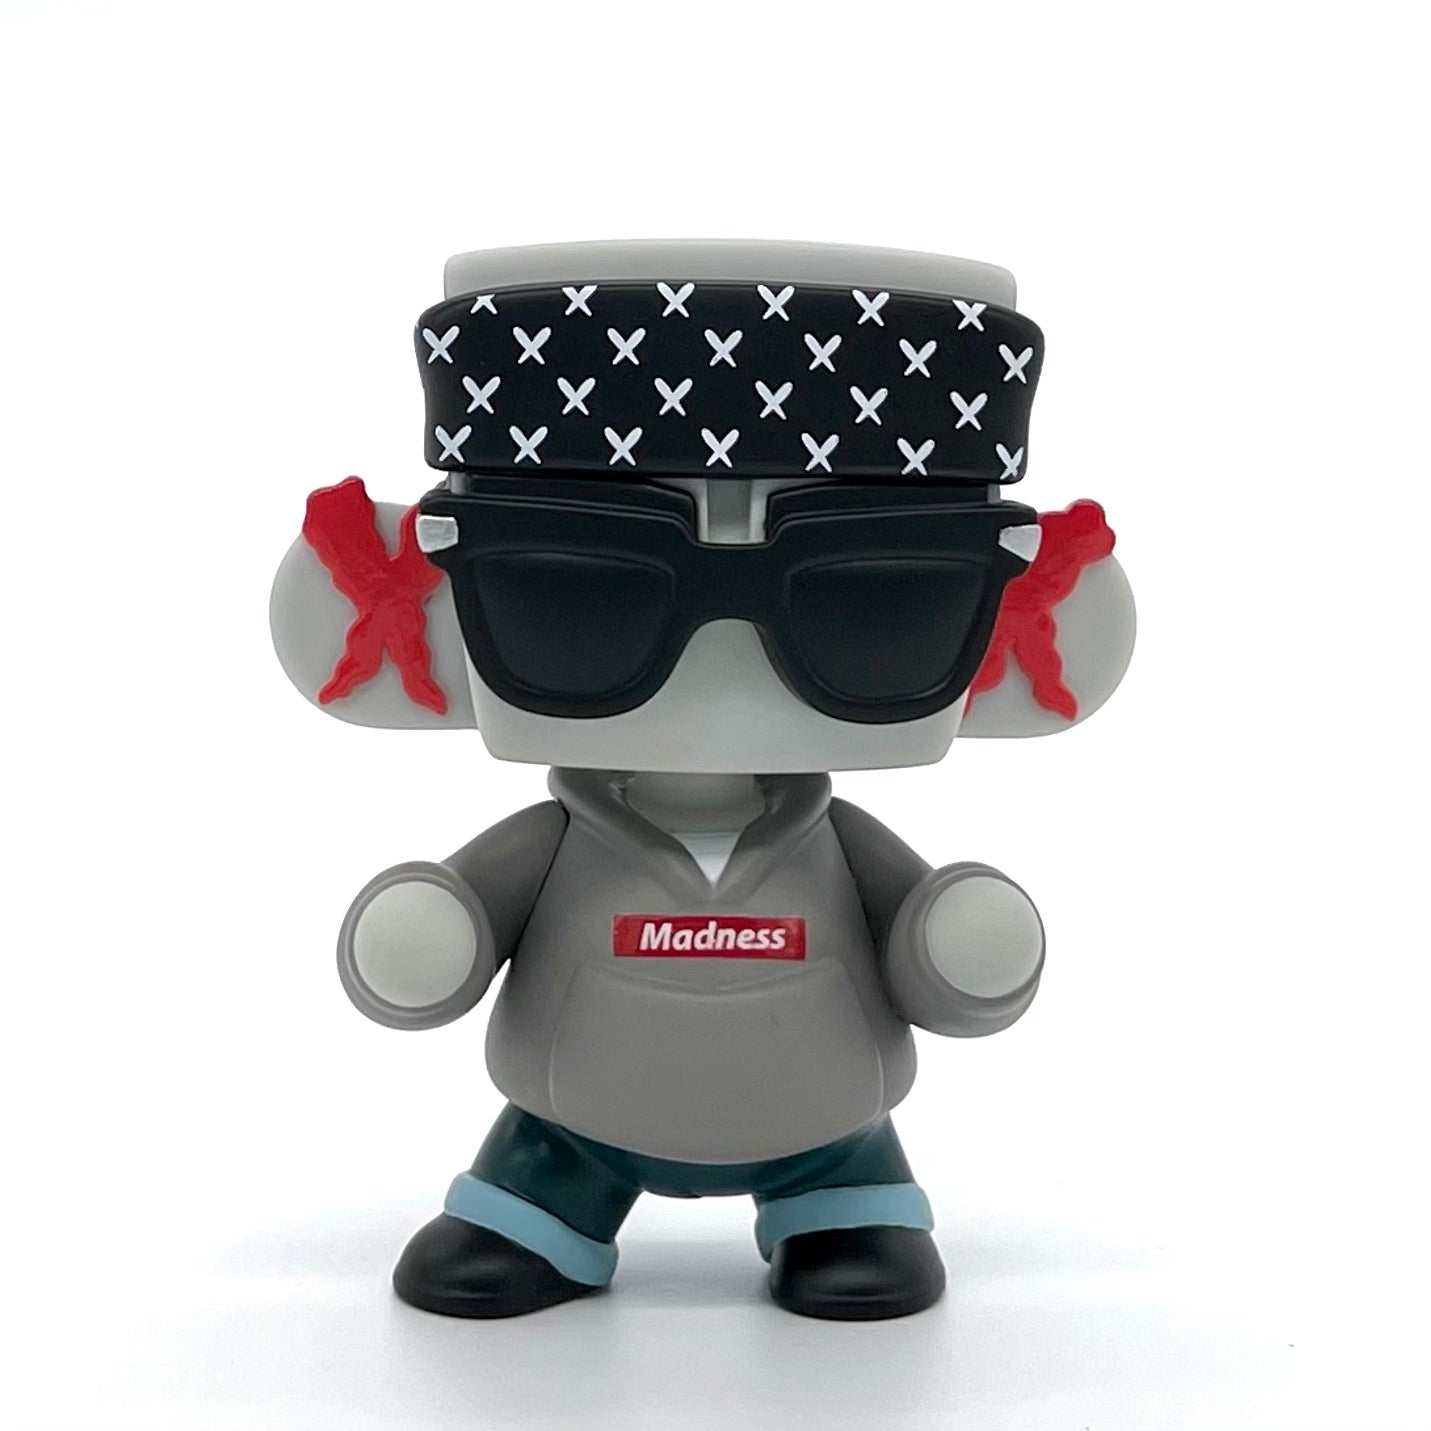 MAD*L Citizens Madness Edition 4-inch vinyl figure by MAD x UVD Toys Available Now